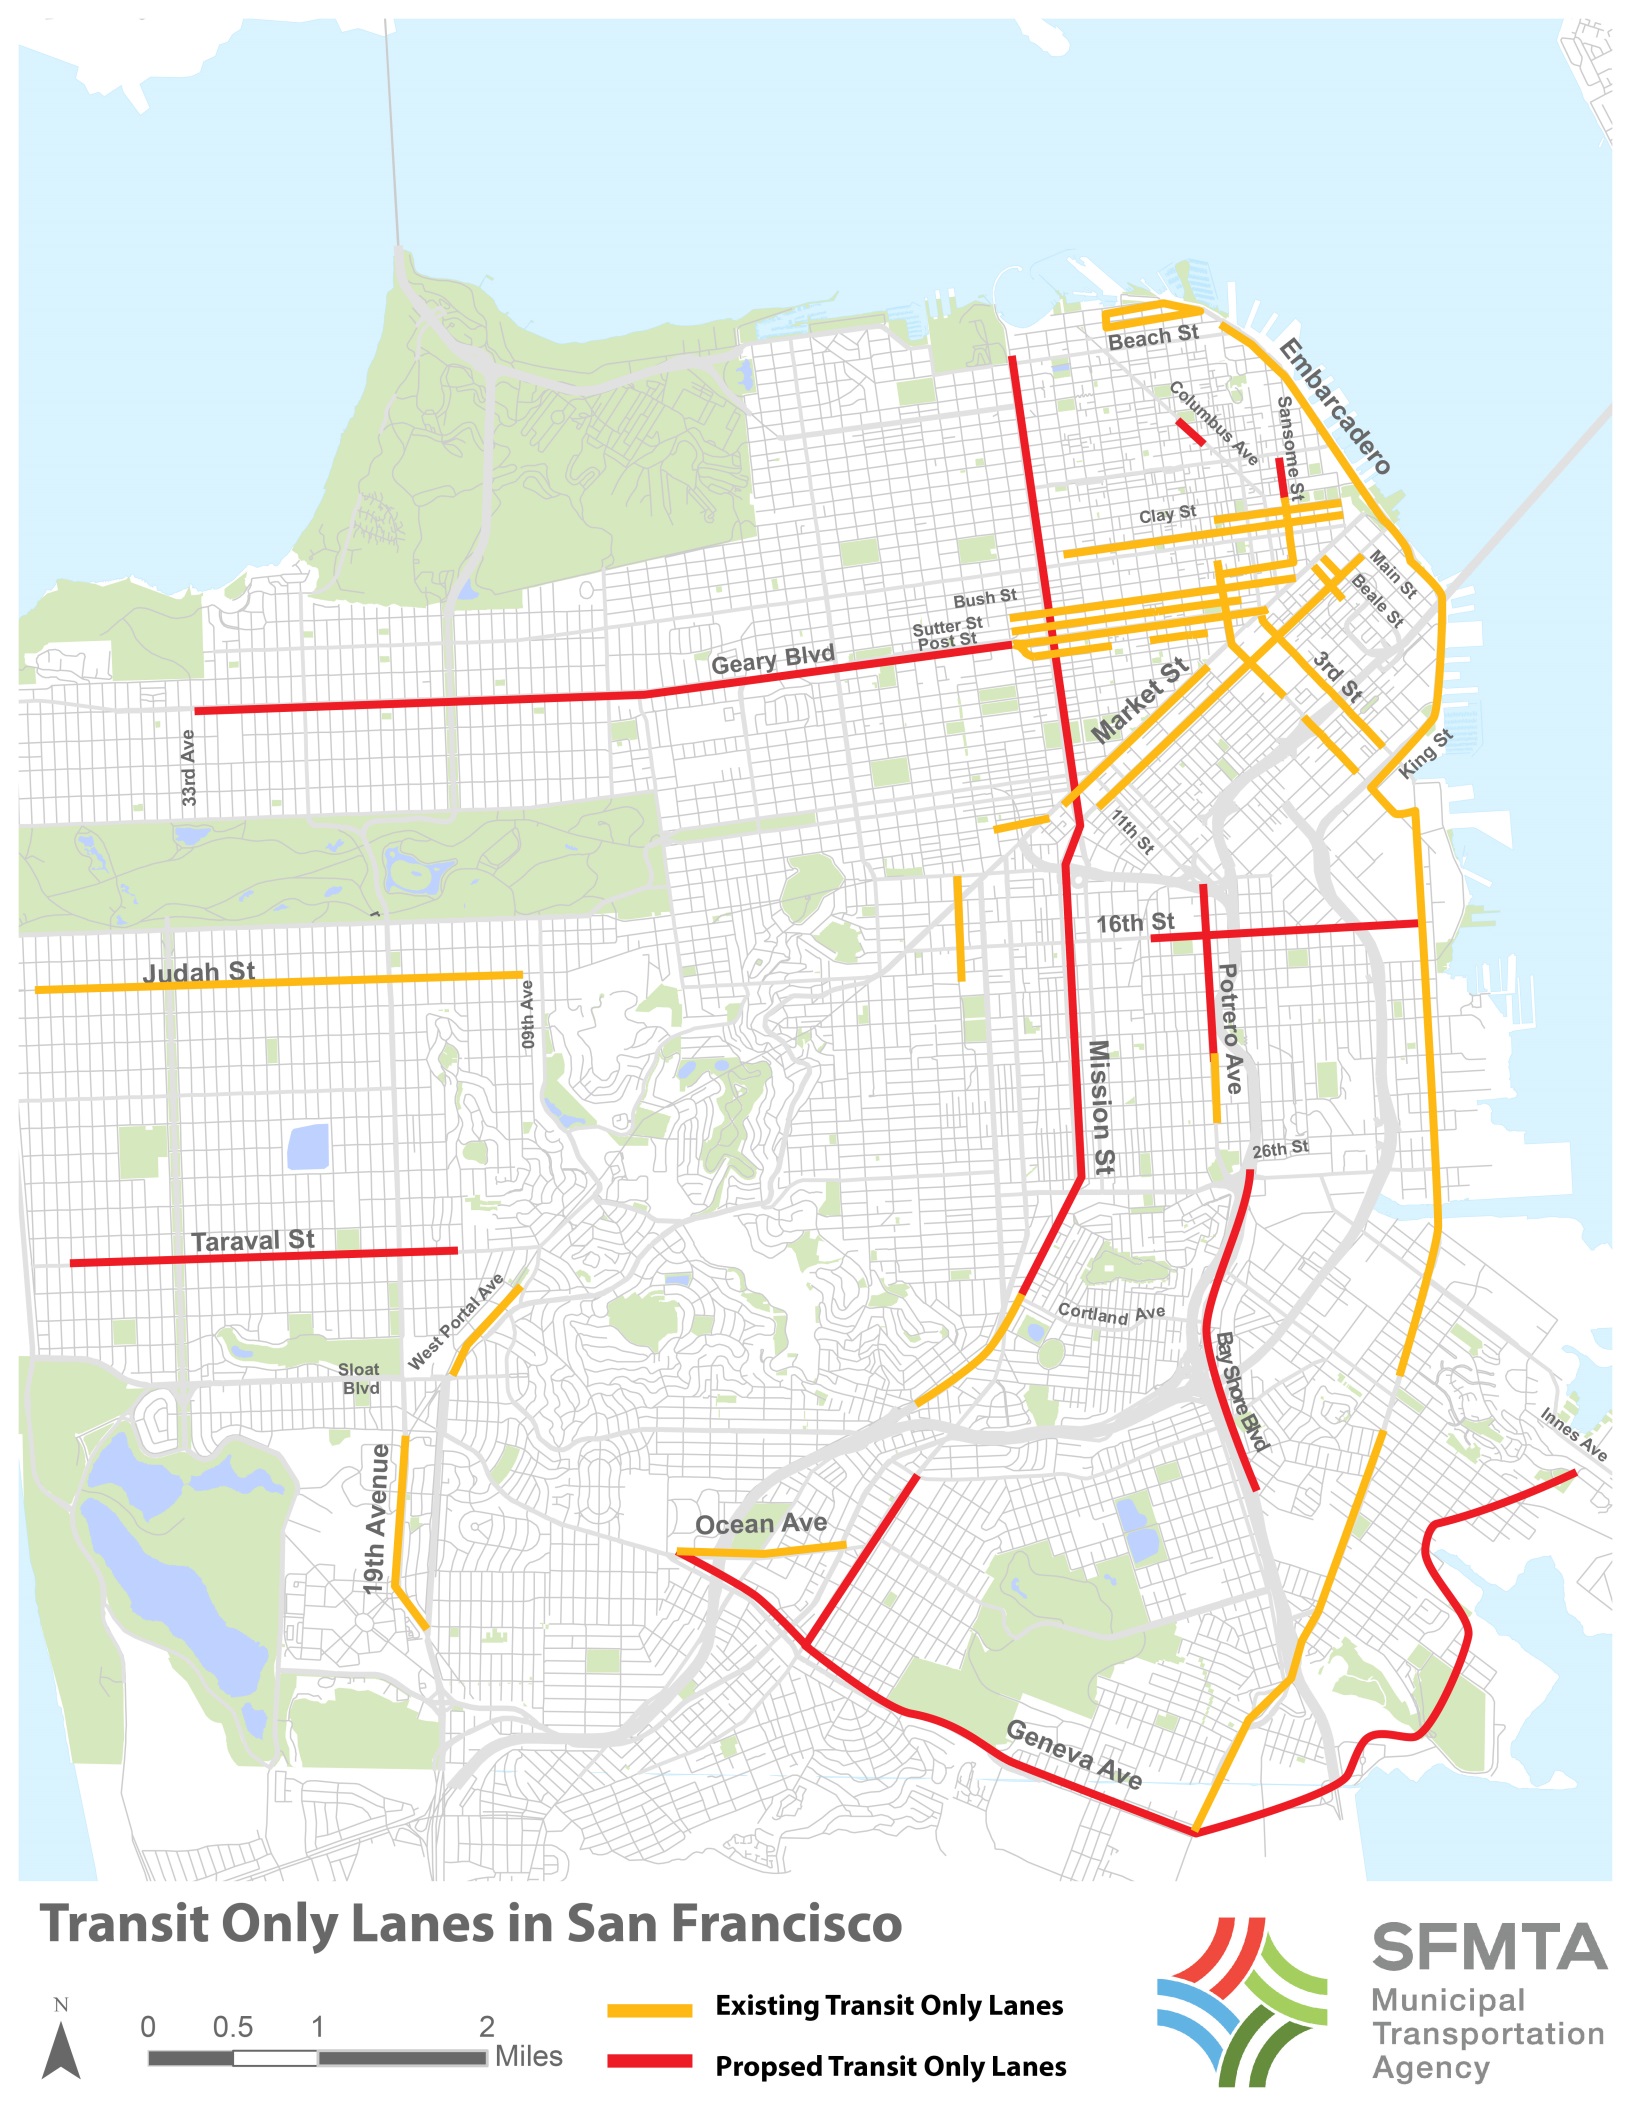 Map of San Francisco showing red lines for existing transit-only lanes and yellow lines for future ones.